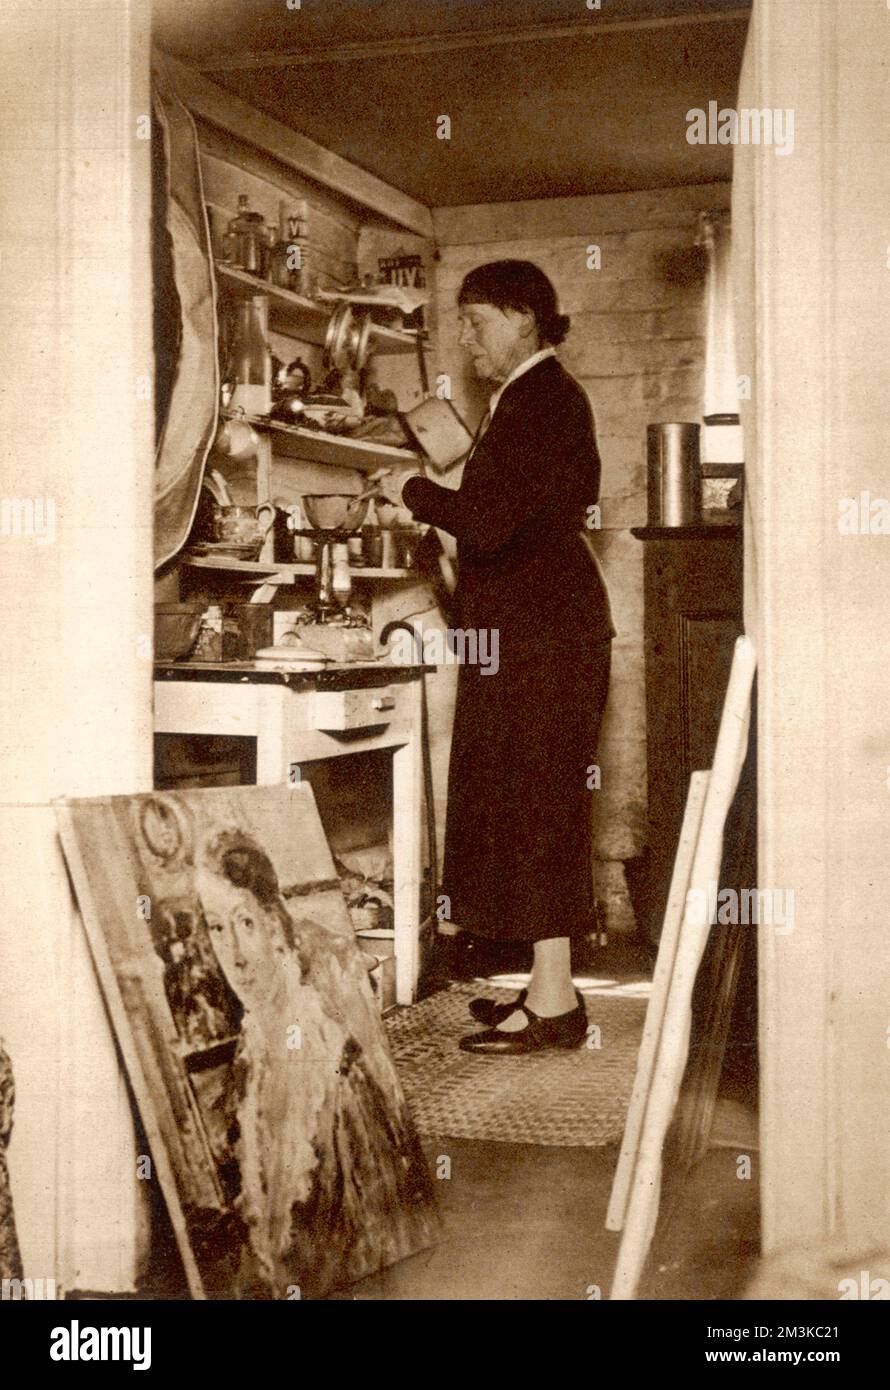 The artist Ethel Walker at her Buckinghamshire cottage. She is seen here in her kitchen cooking at the stove, flanked by her paintings which lean by the doorway.. Ethel was bombed out of her Chelsea studio in 1940 and after this date lived in extreme simplicity at her workman's cottage in Cholesbury.     Date: 1861-1951 Stock Photo